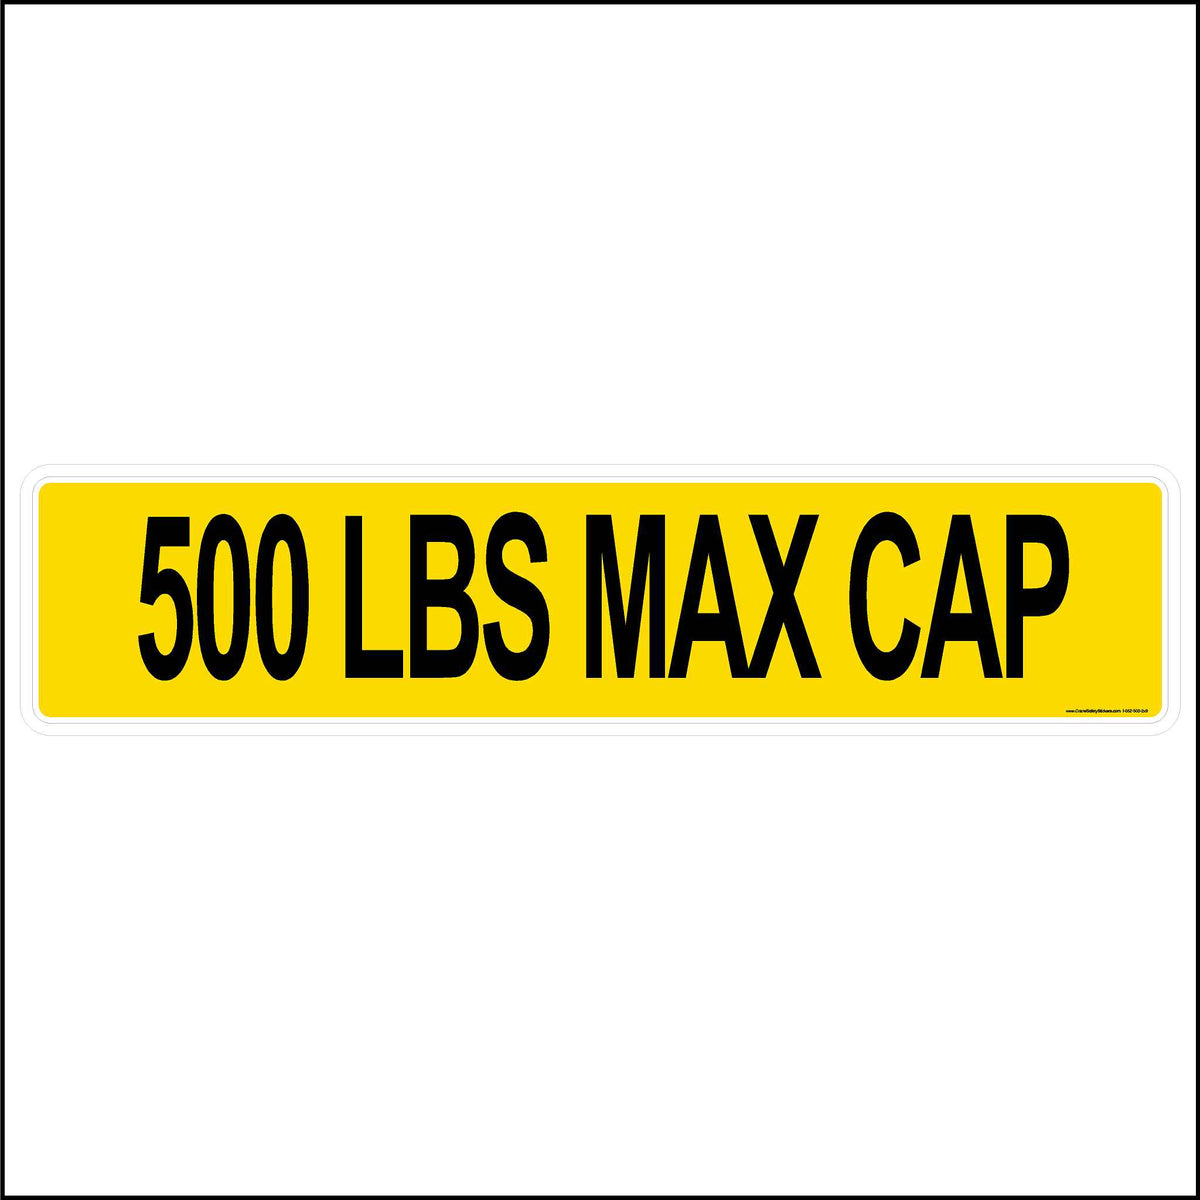 yellow background with black text - 500 lbs max cap.